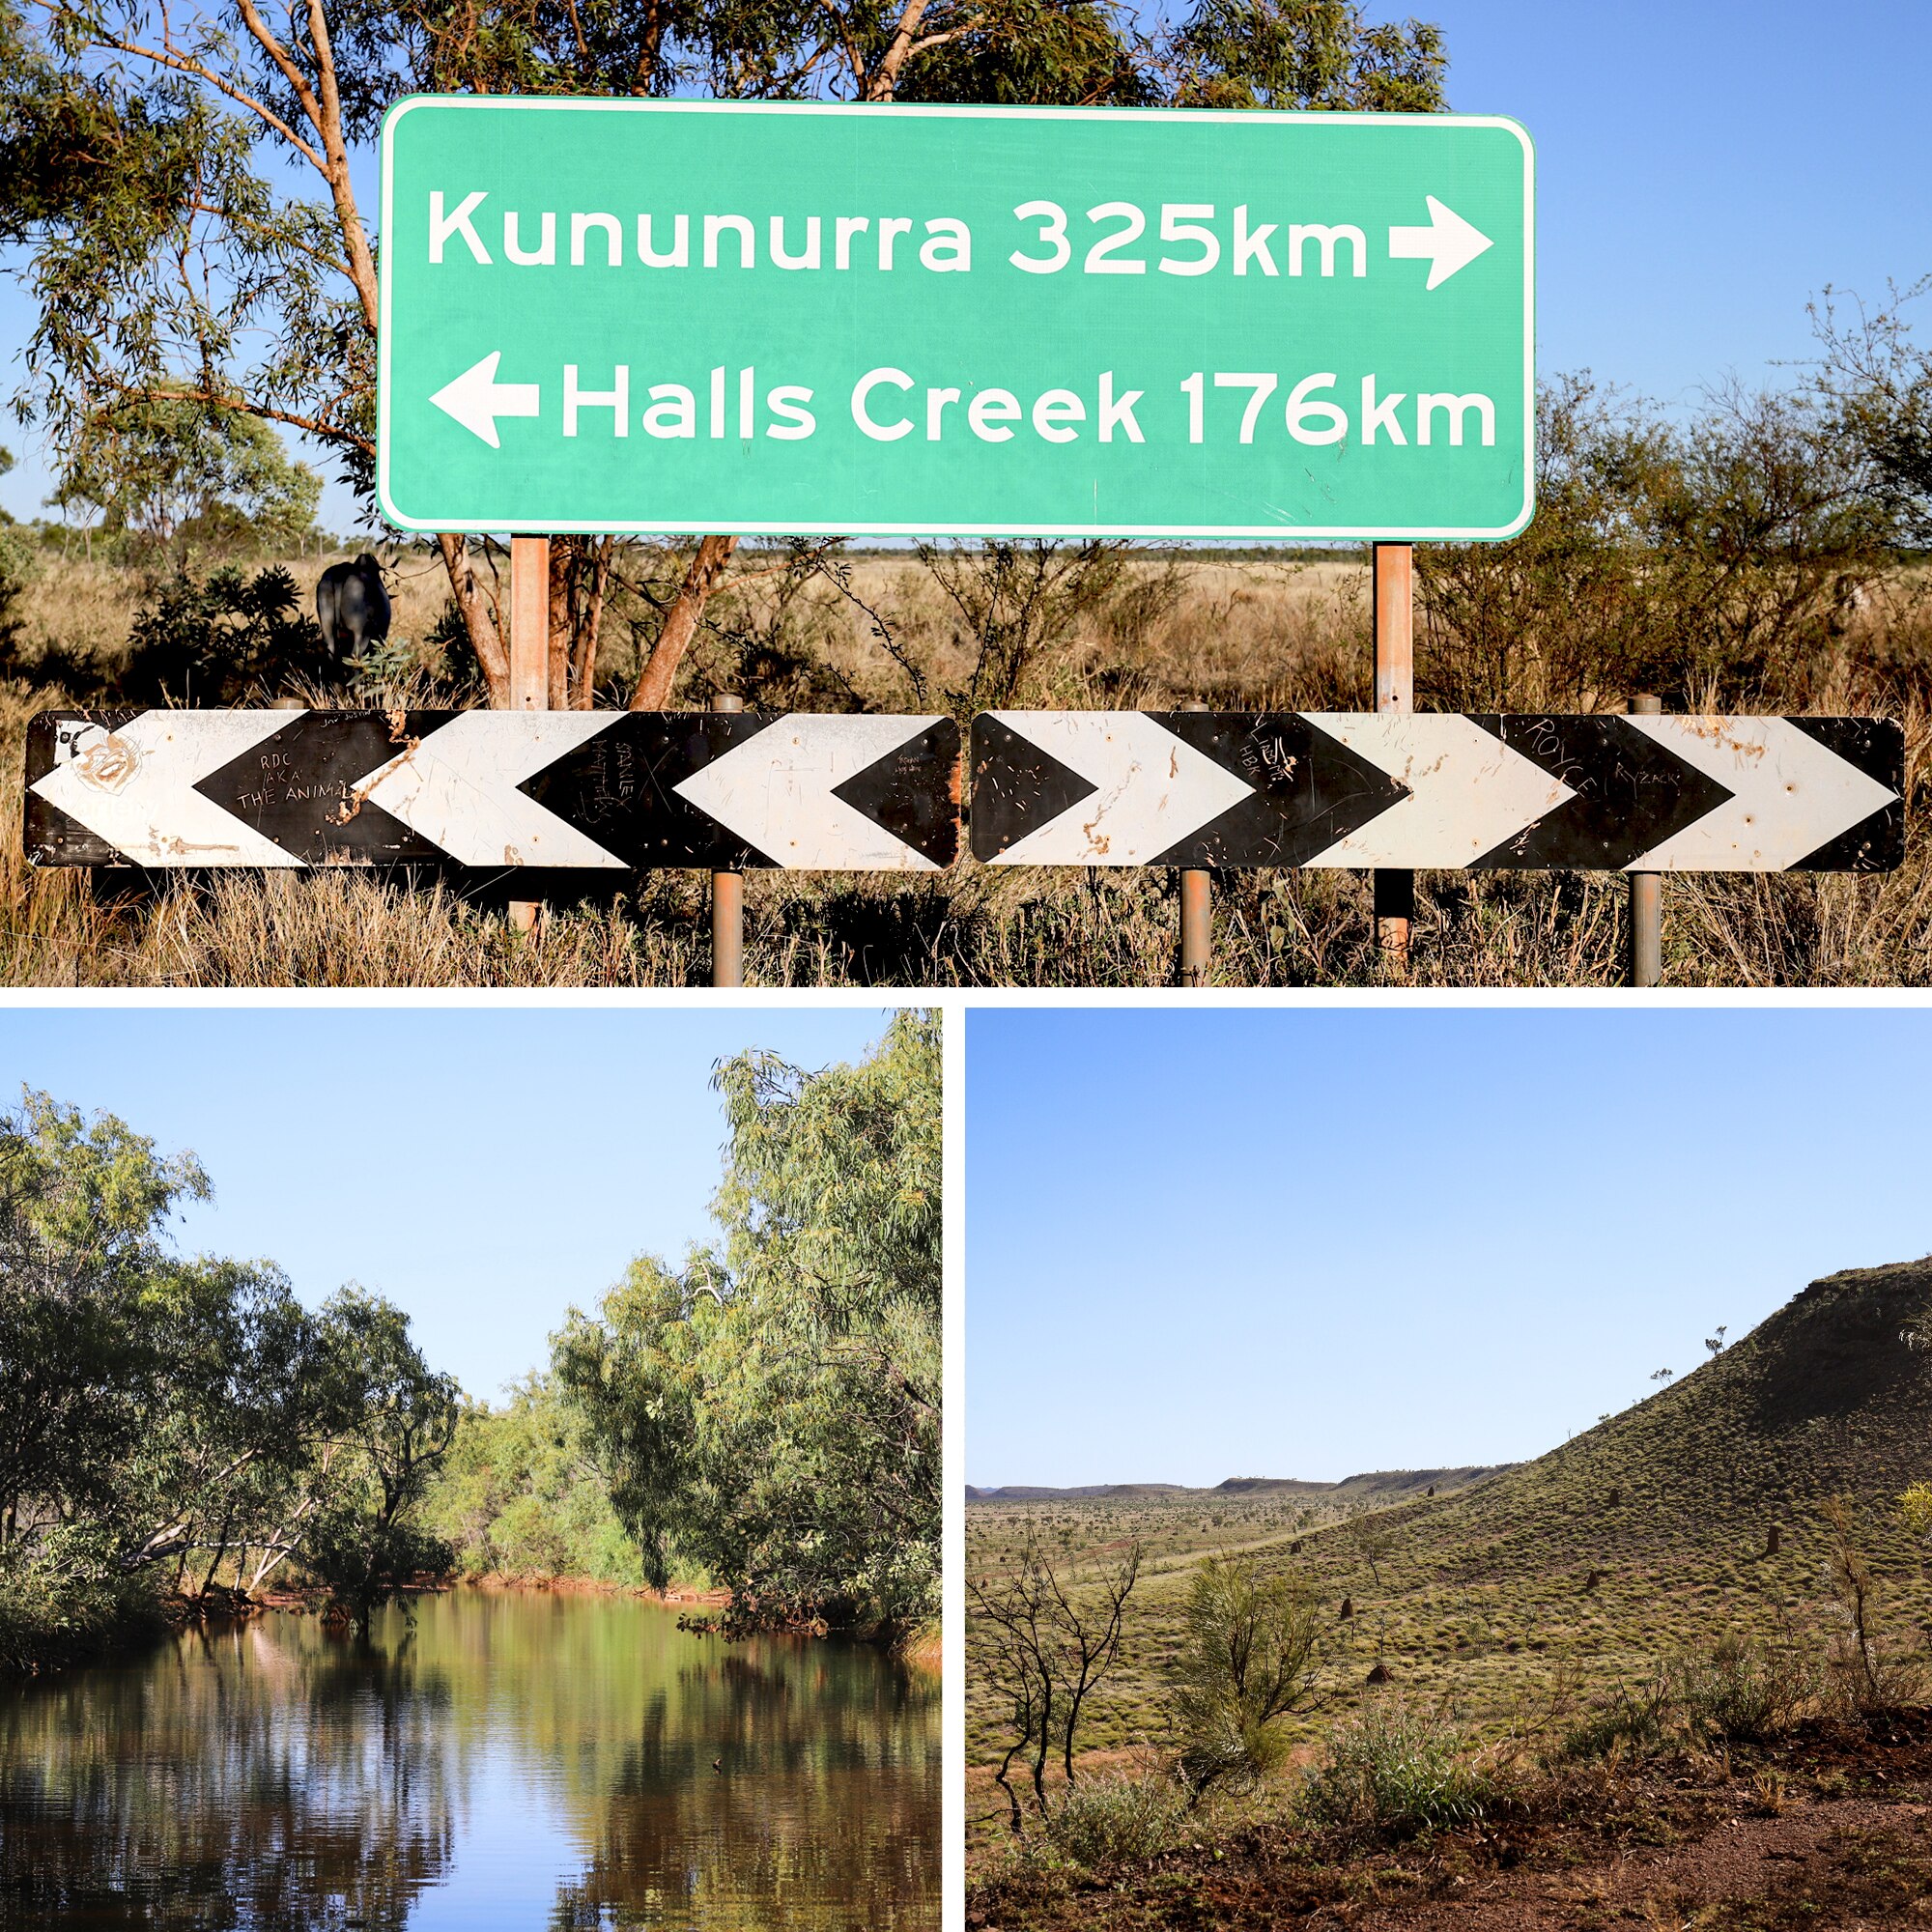 A road sign: "Kununurra 325km" and "Halls Creek 176km". A river lined with lush vegetation. A weathered mountain range.